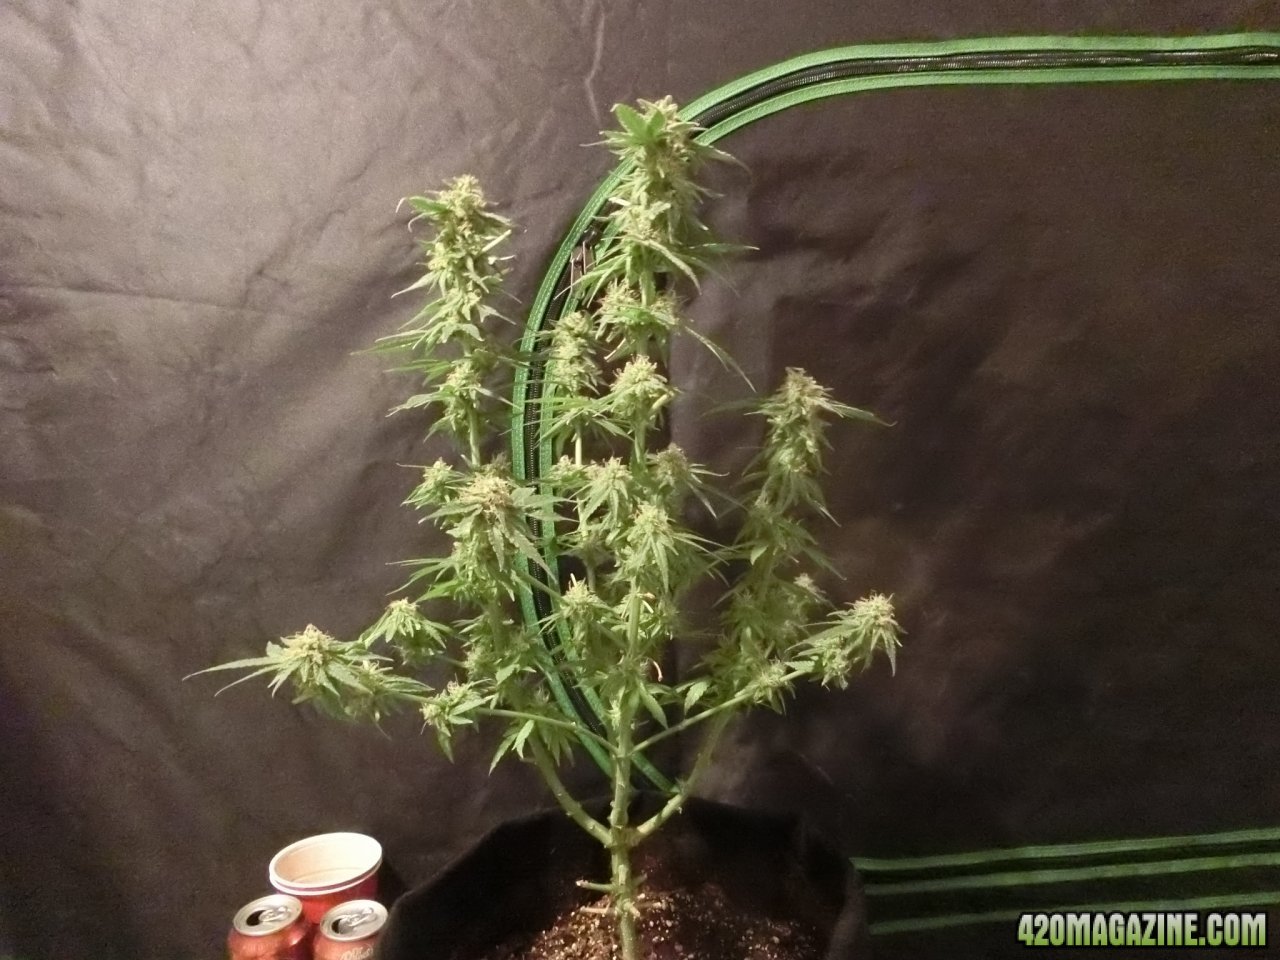 Day 103 Double Black Flower Day 57ish